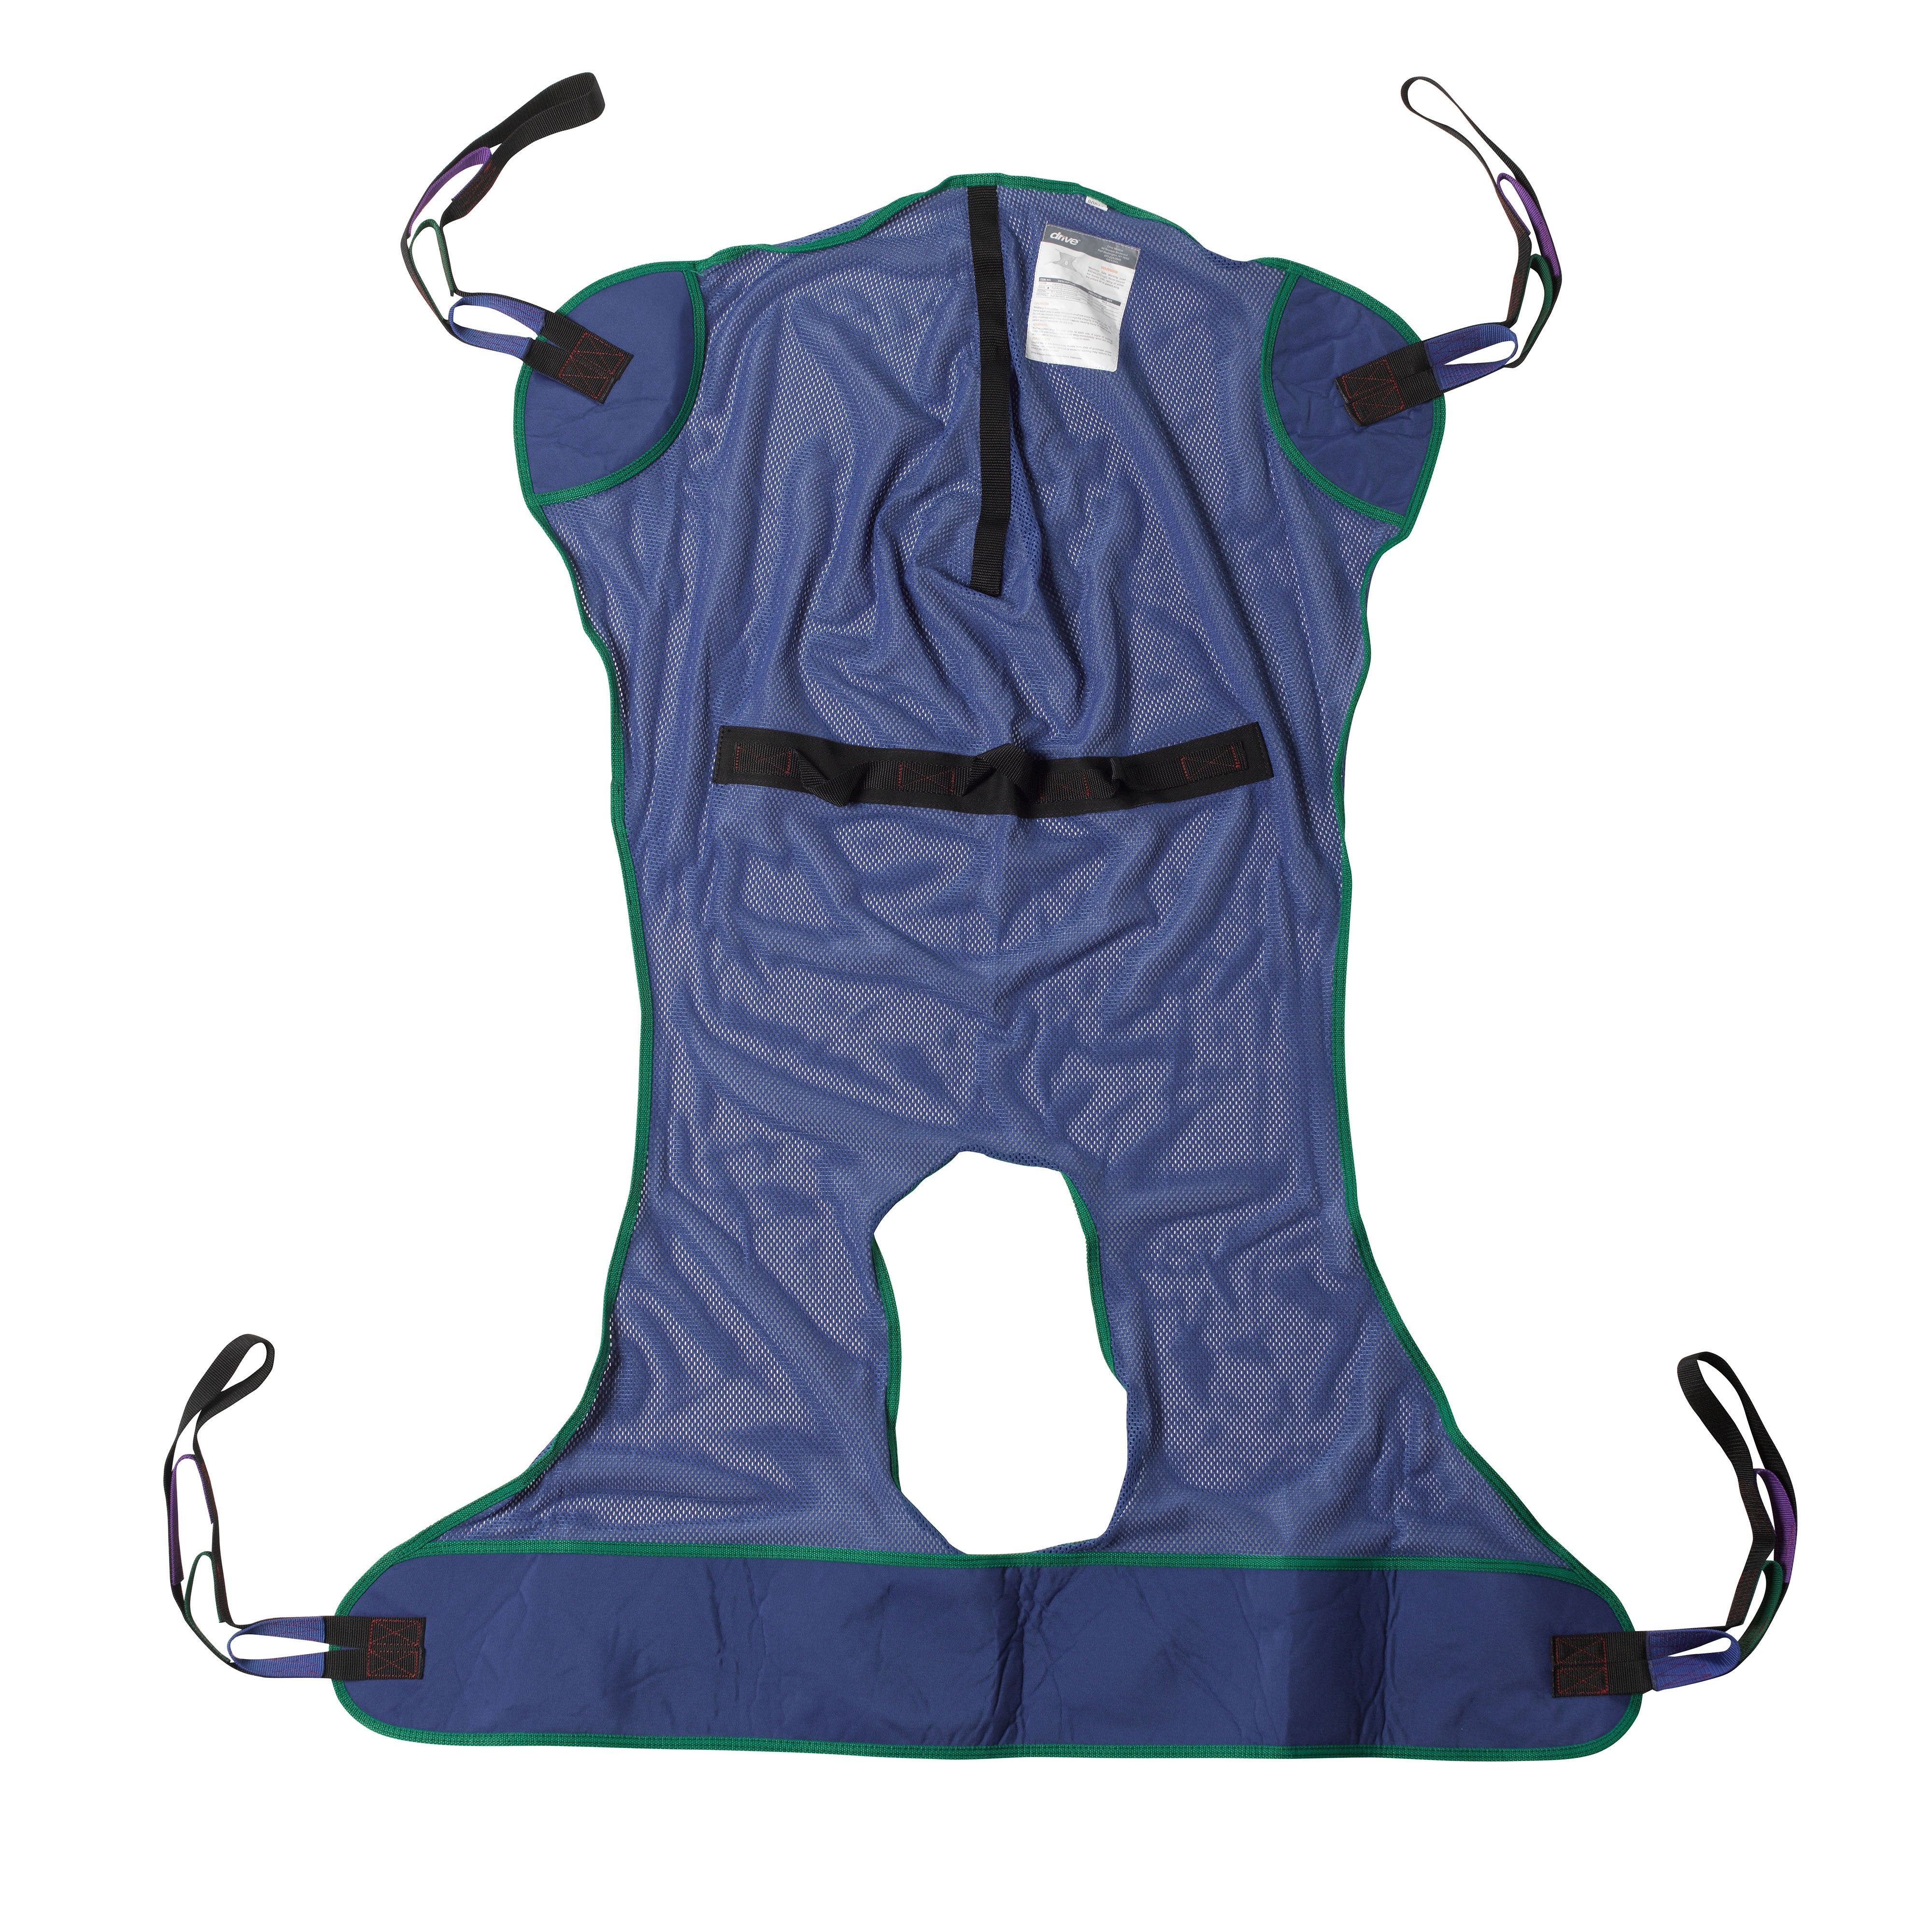 Full Body Patient Lift Sling- Large